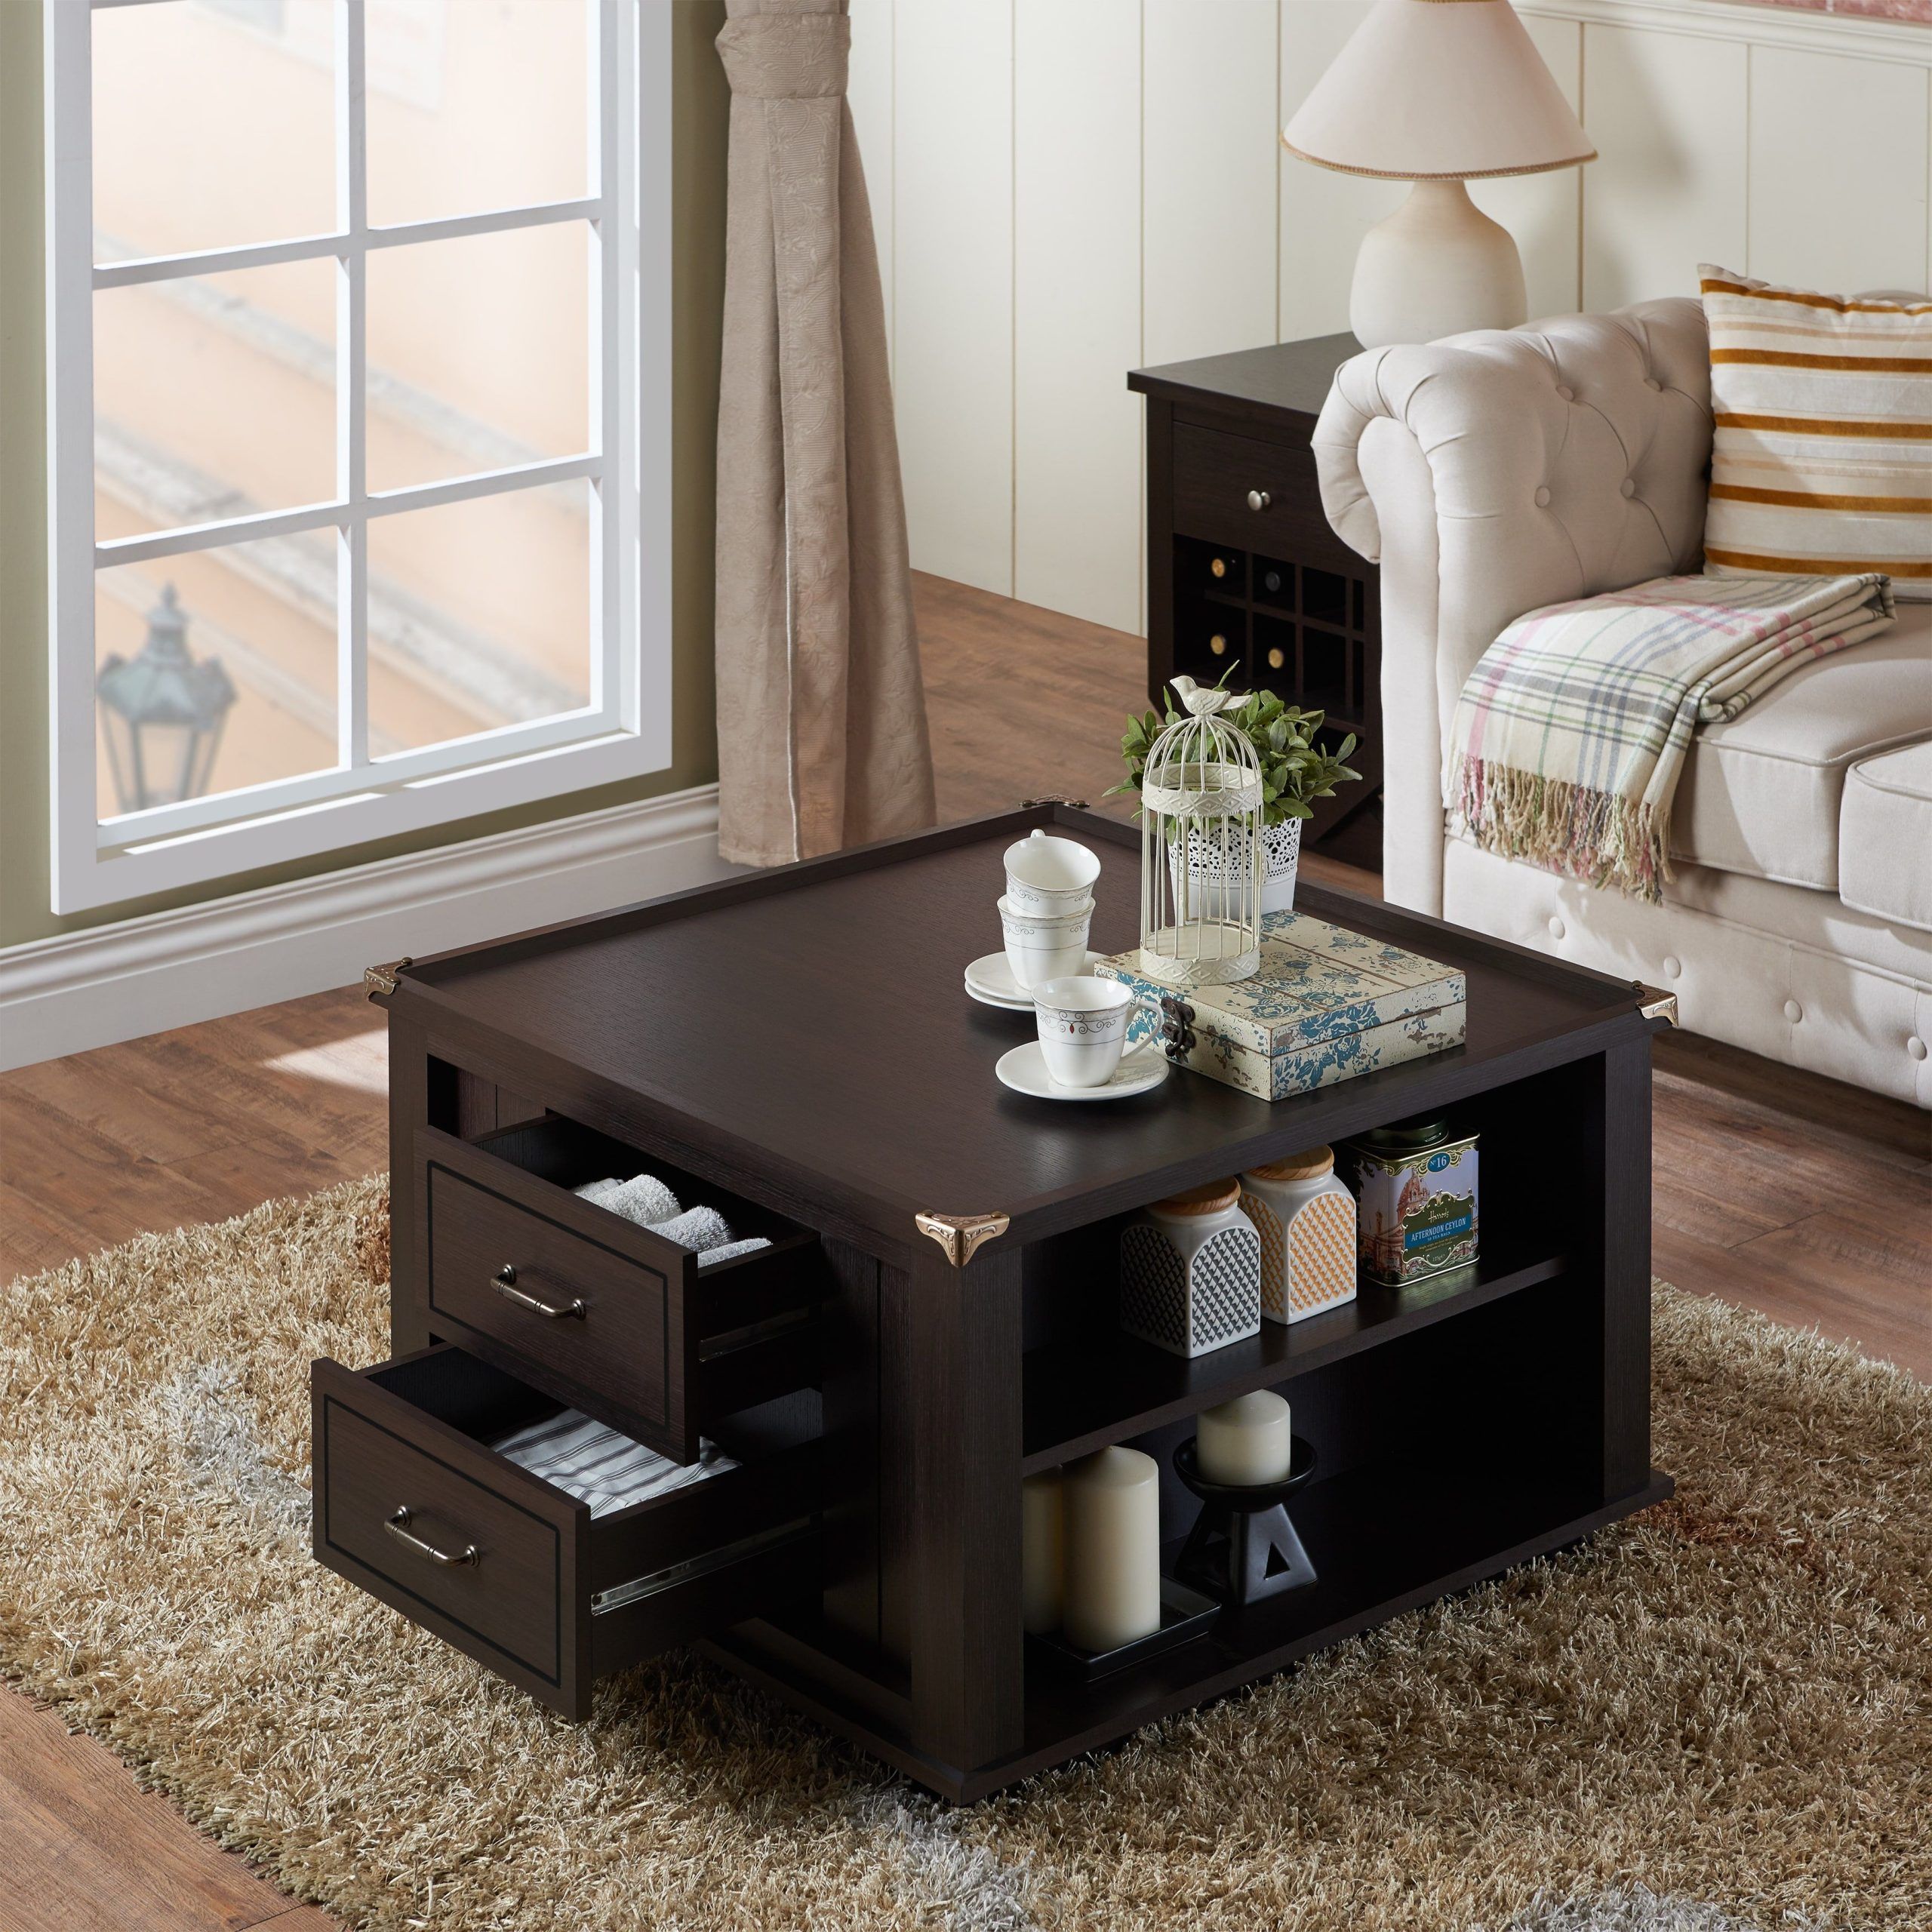 Our Best Living Room Furniture Deals | Coffee Table, Furniture Of Pertaining To Transitional Square Coffee Tables (View 8 of 15)